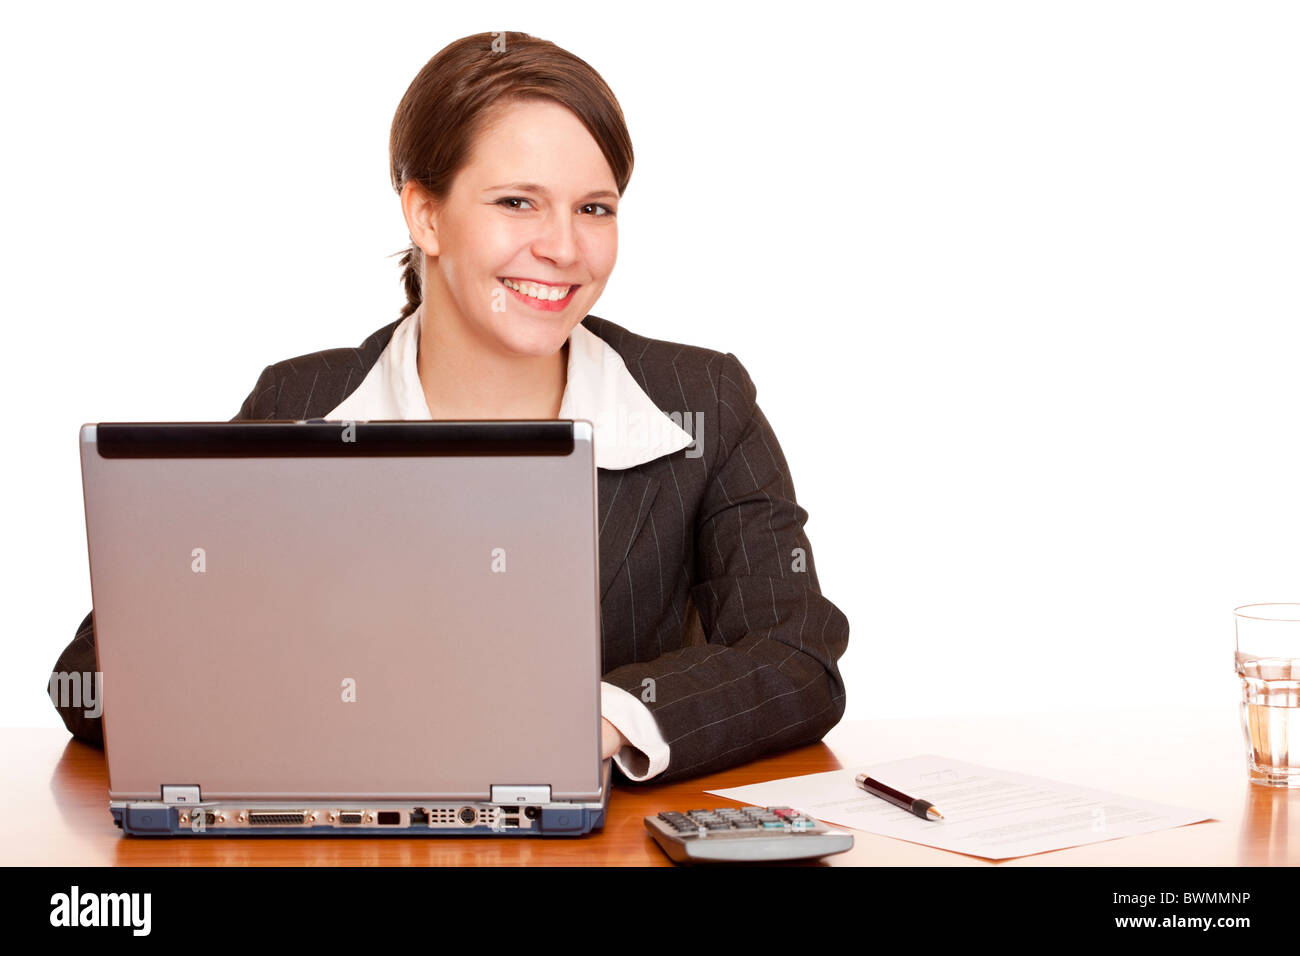 Young business woman sitting happy in office and works on computer. Isolated on white background. Stock Photo